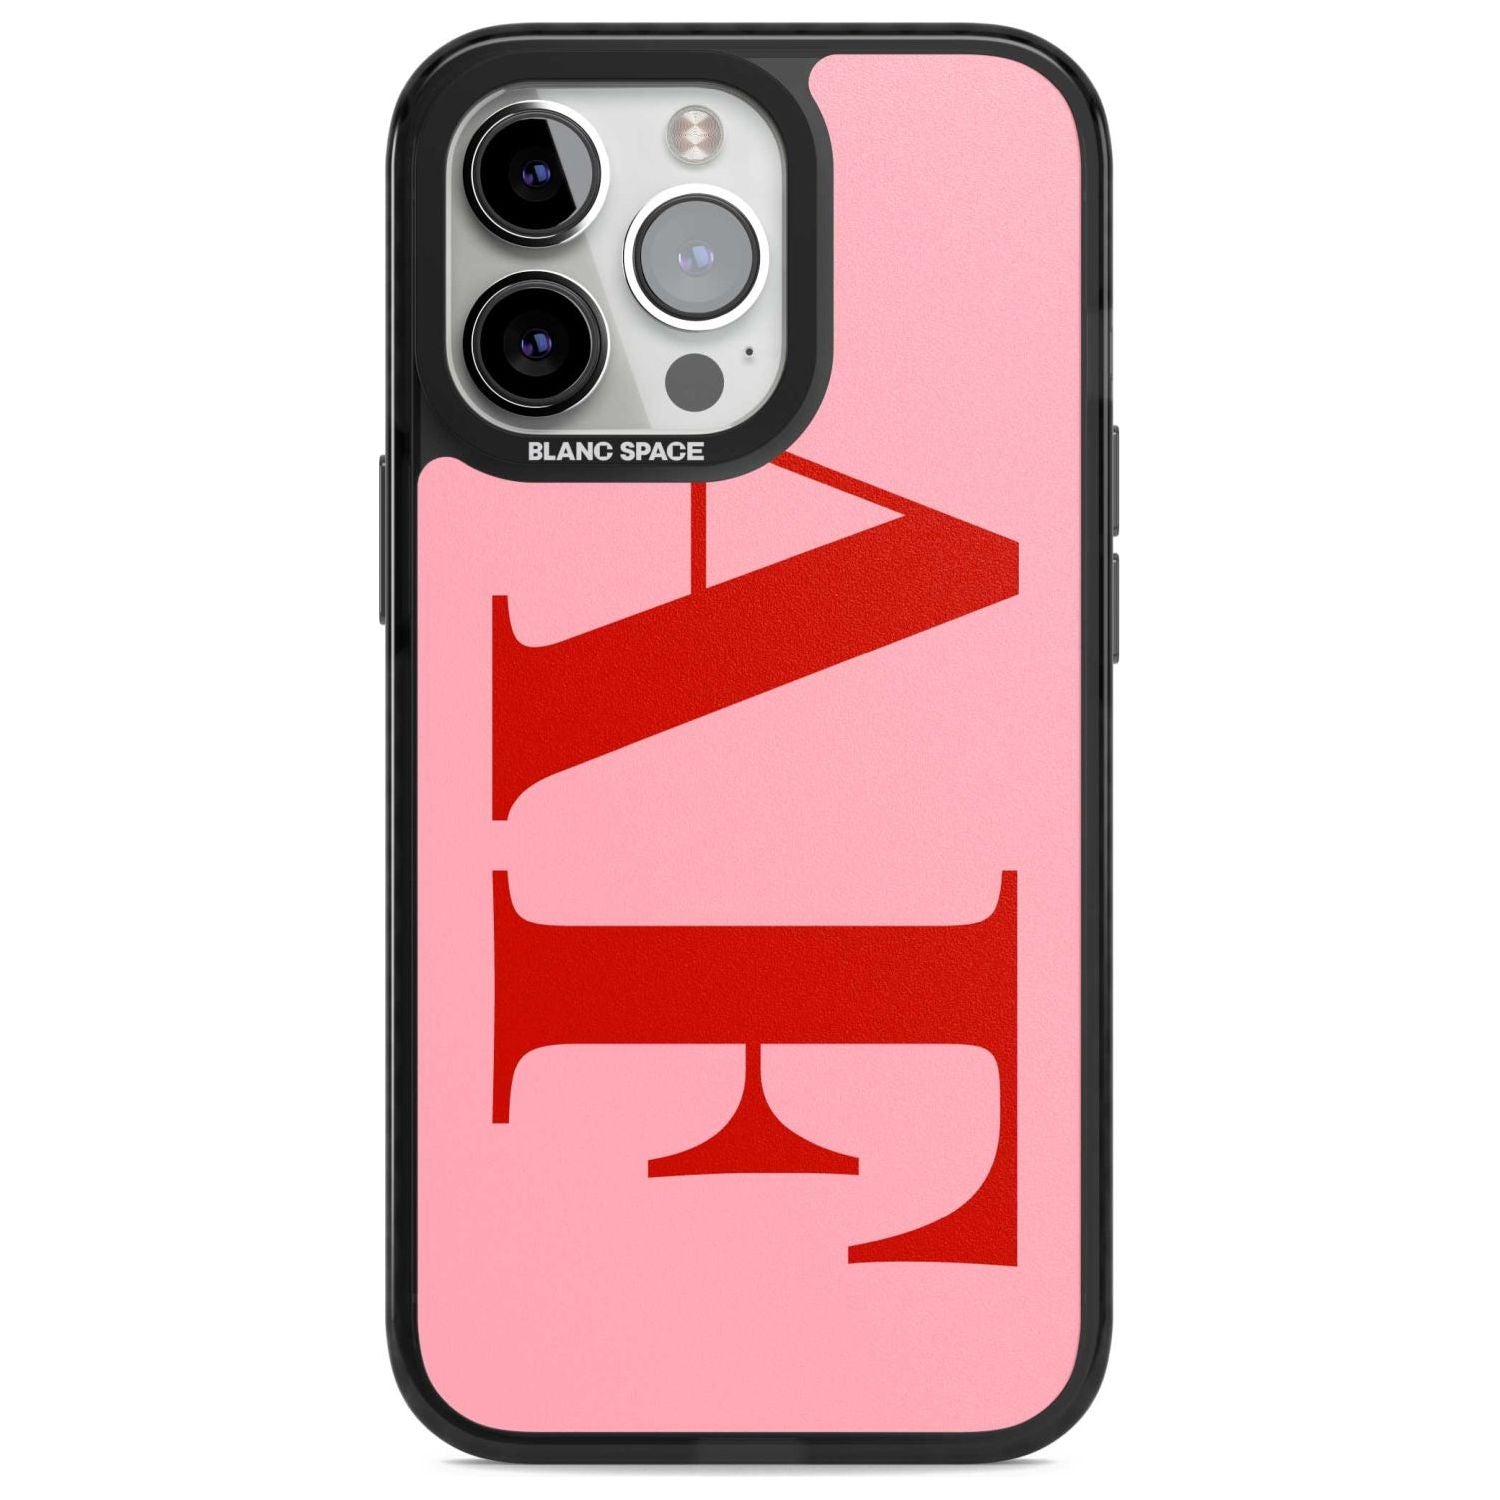 Personalised Red & Pink Letters Custom Phone Case iPhone 15 Pro Max / Magsafe Black Impact Case,iPhone 15 Pro / Magsafe Black Impact Case,iPhone 14 Pro Max / Magsafe Black Impact Case,iPhone 14 Pro / Magsafe Black Impact Case,iPhone 13 Pro / Magsafe Black Impact Case Blanc Space